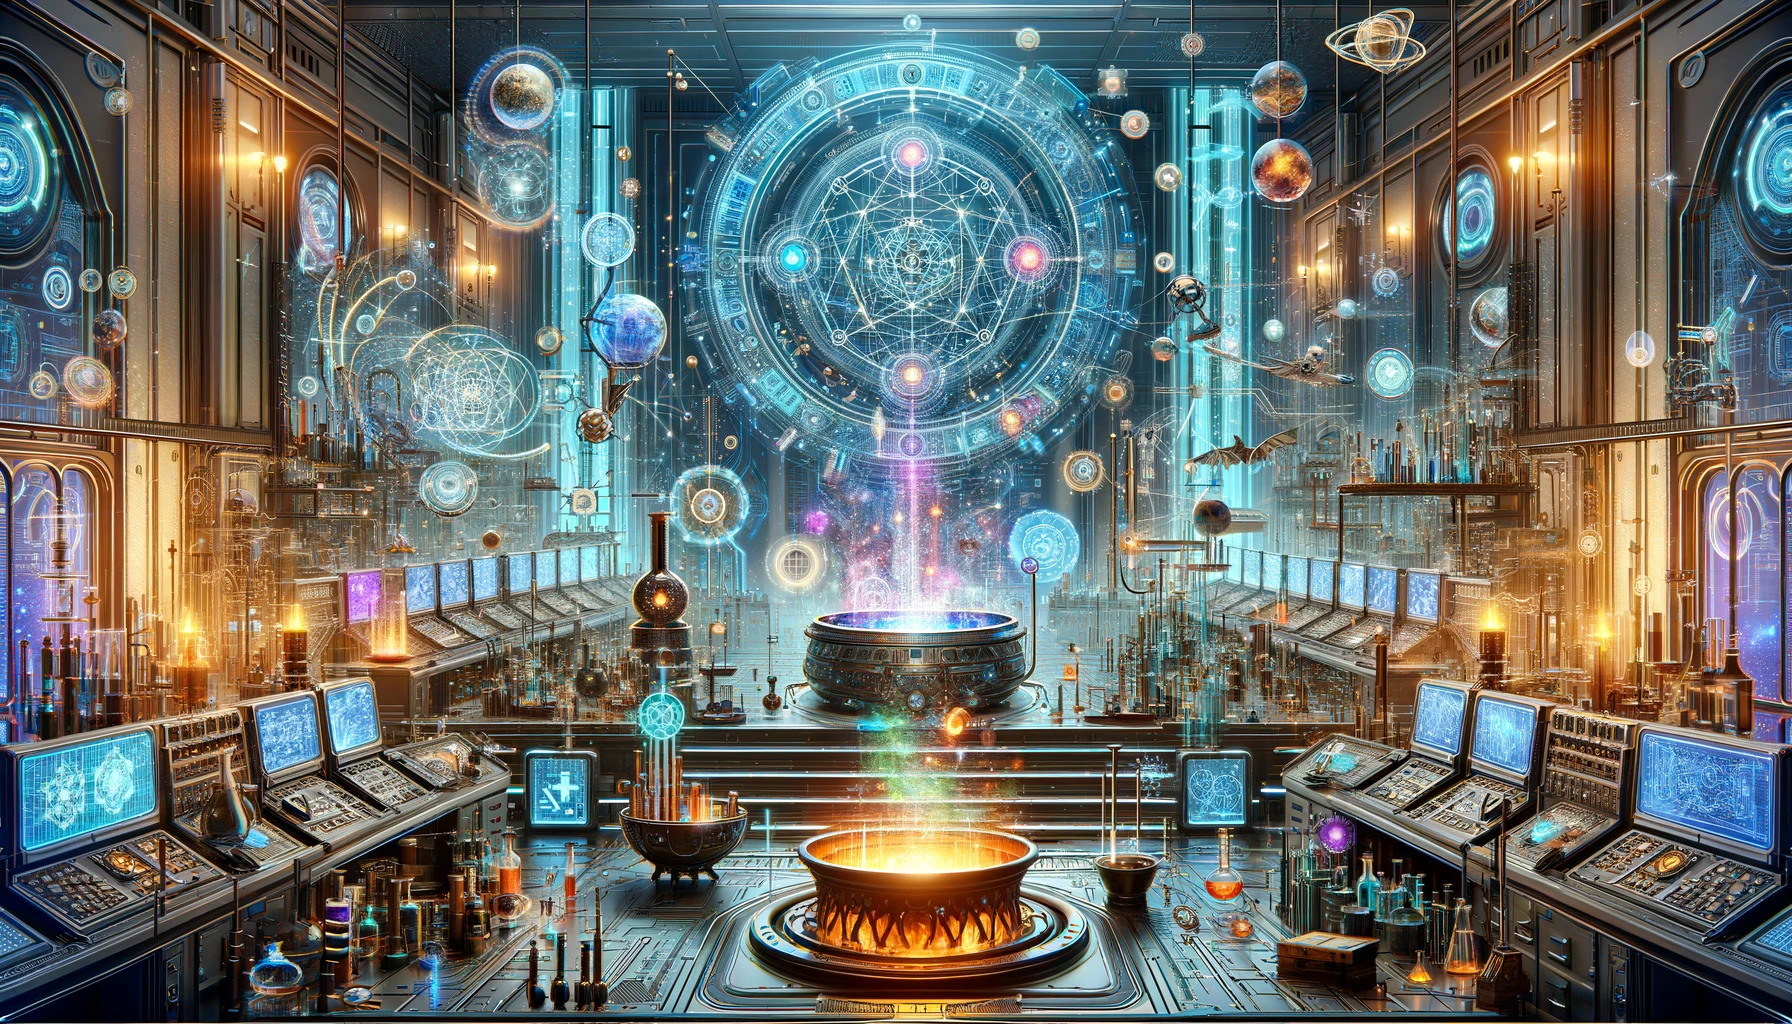 Orbital bodies and alchemical symbols in a high-tech control room